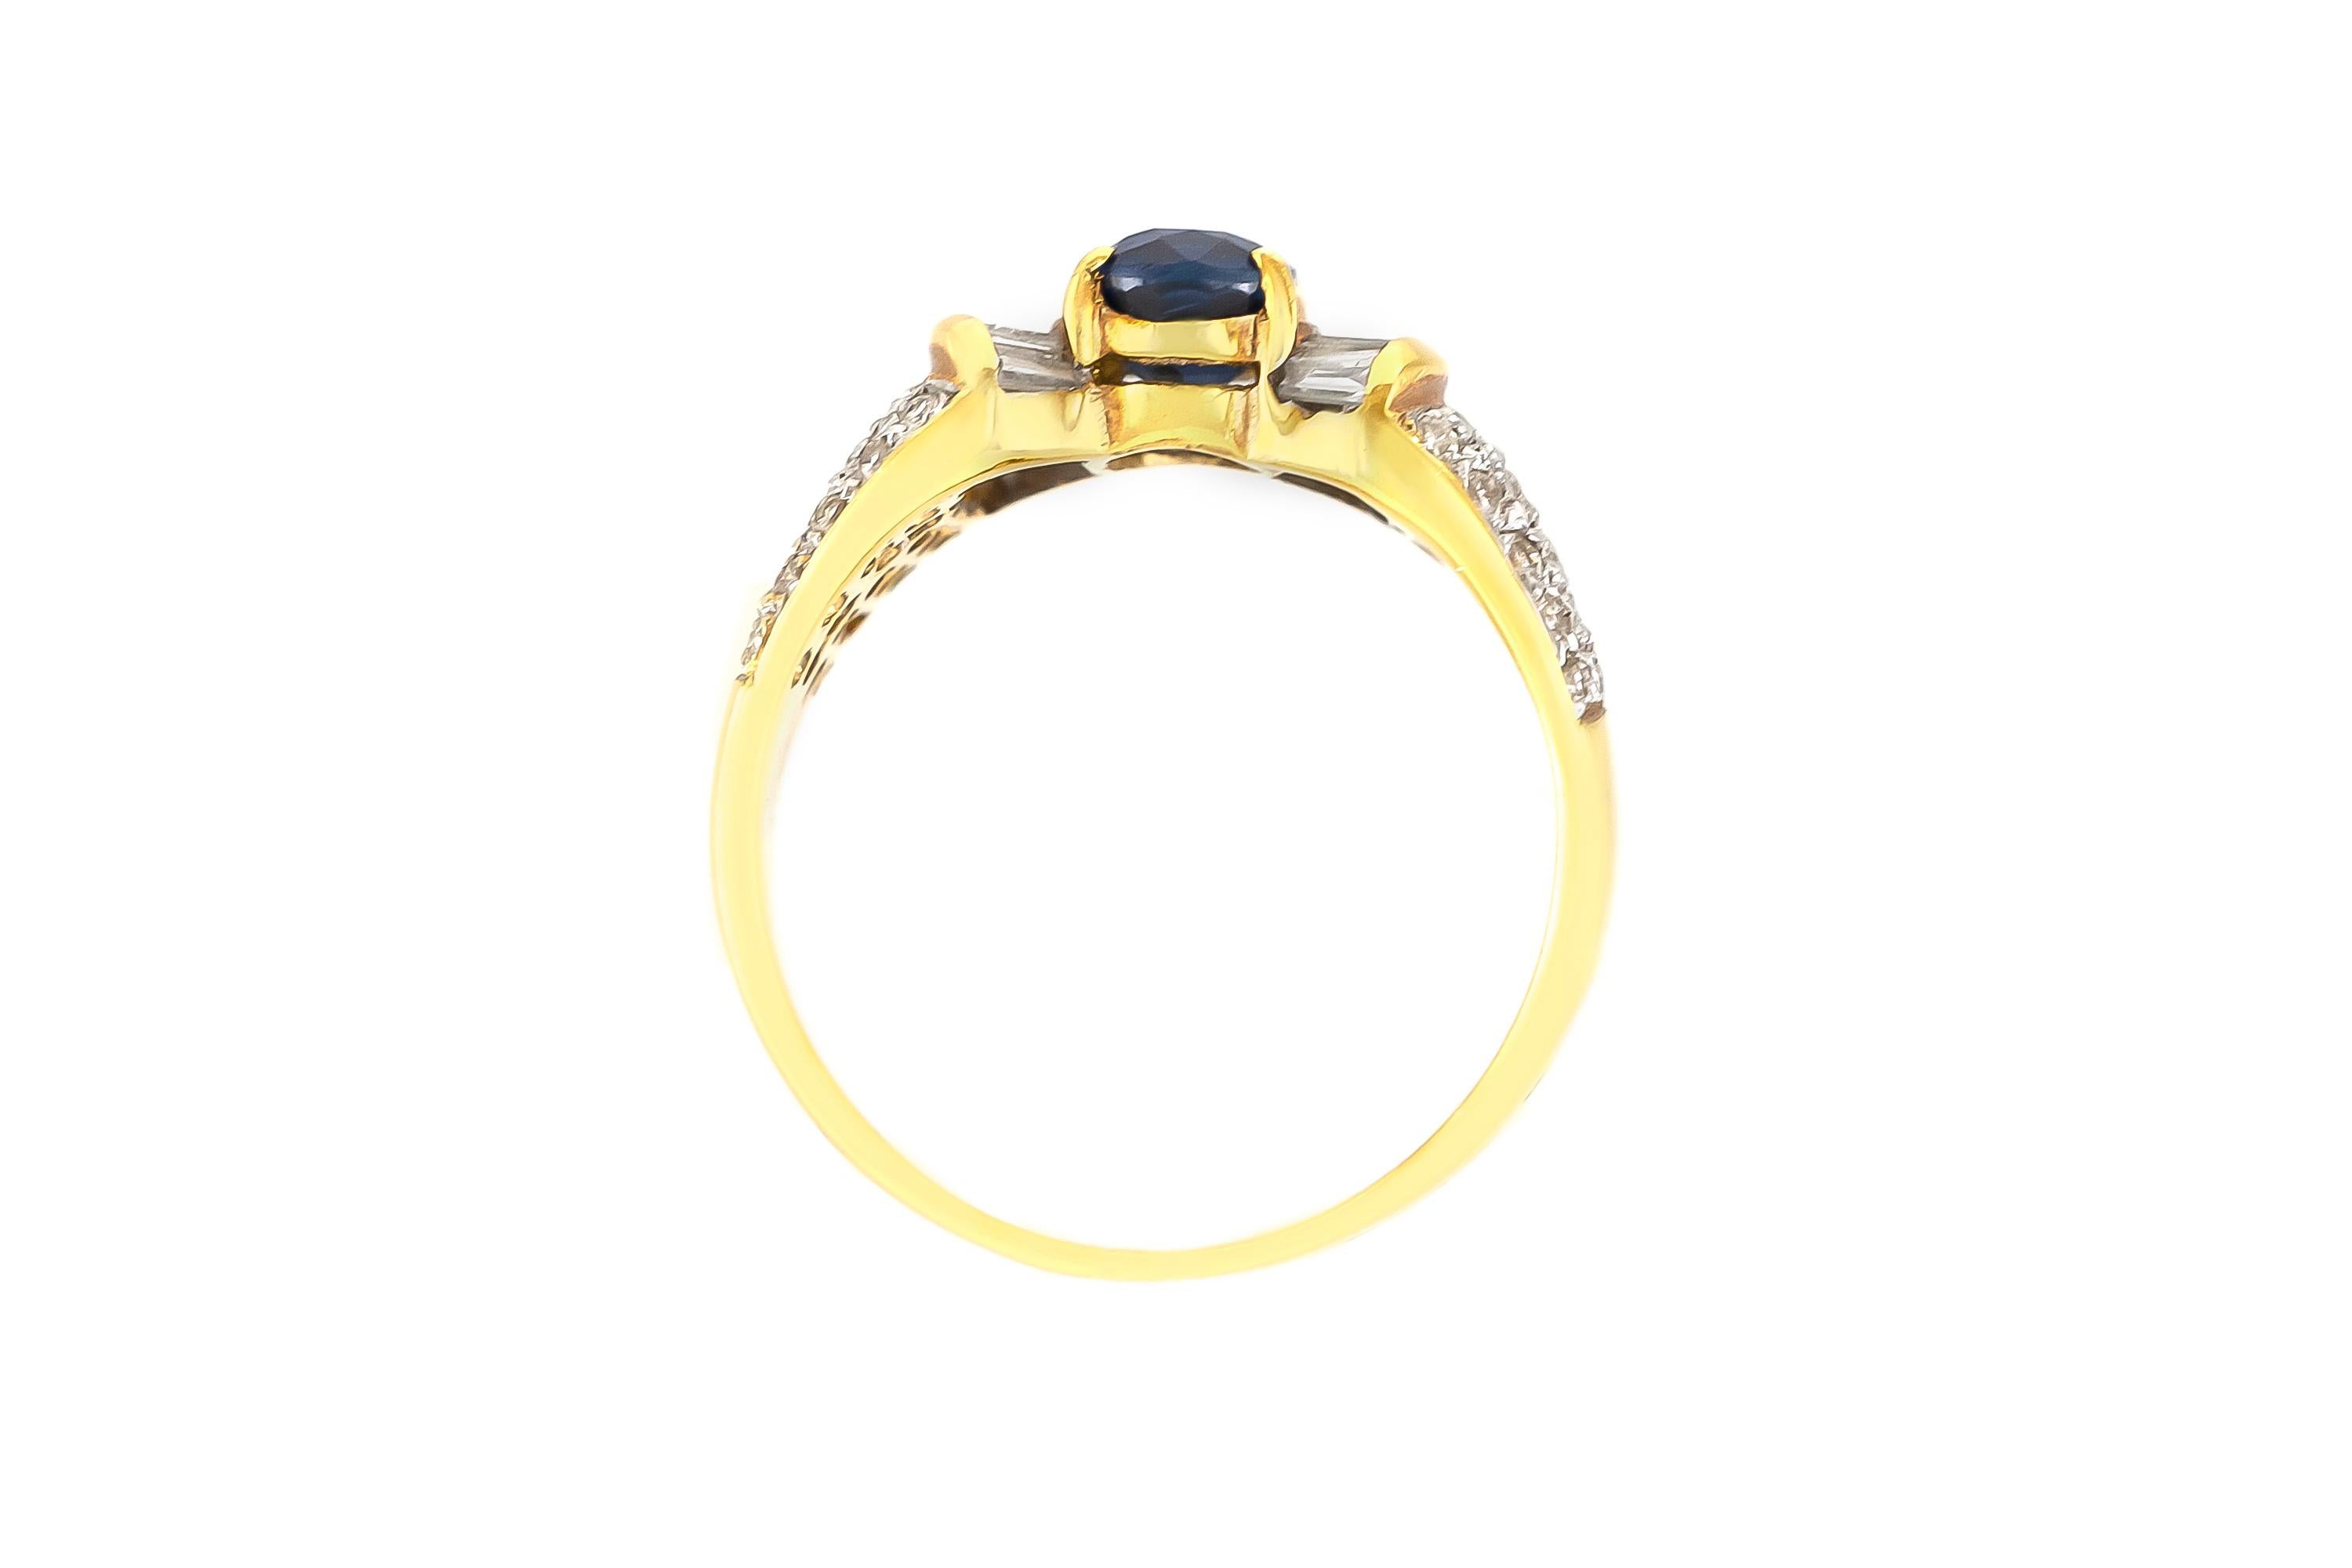 The ring is finely crafted in 18k with diamonds weighing approximately total of  1.50 carat and with synthetic  sapphire weighing approximately total of 1.50 carat.
Circa 1980.